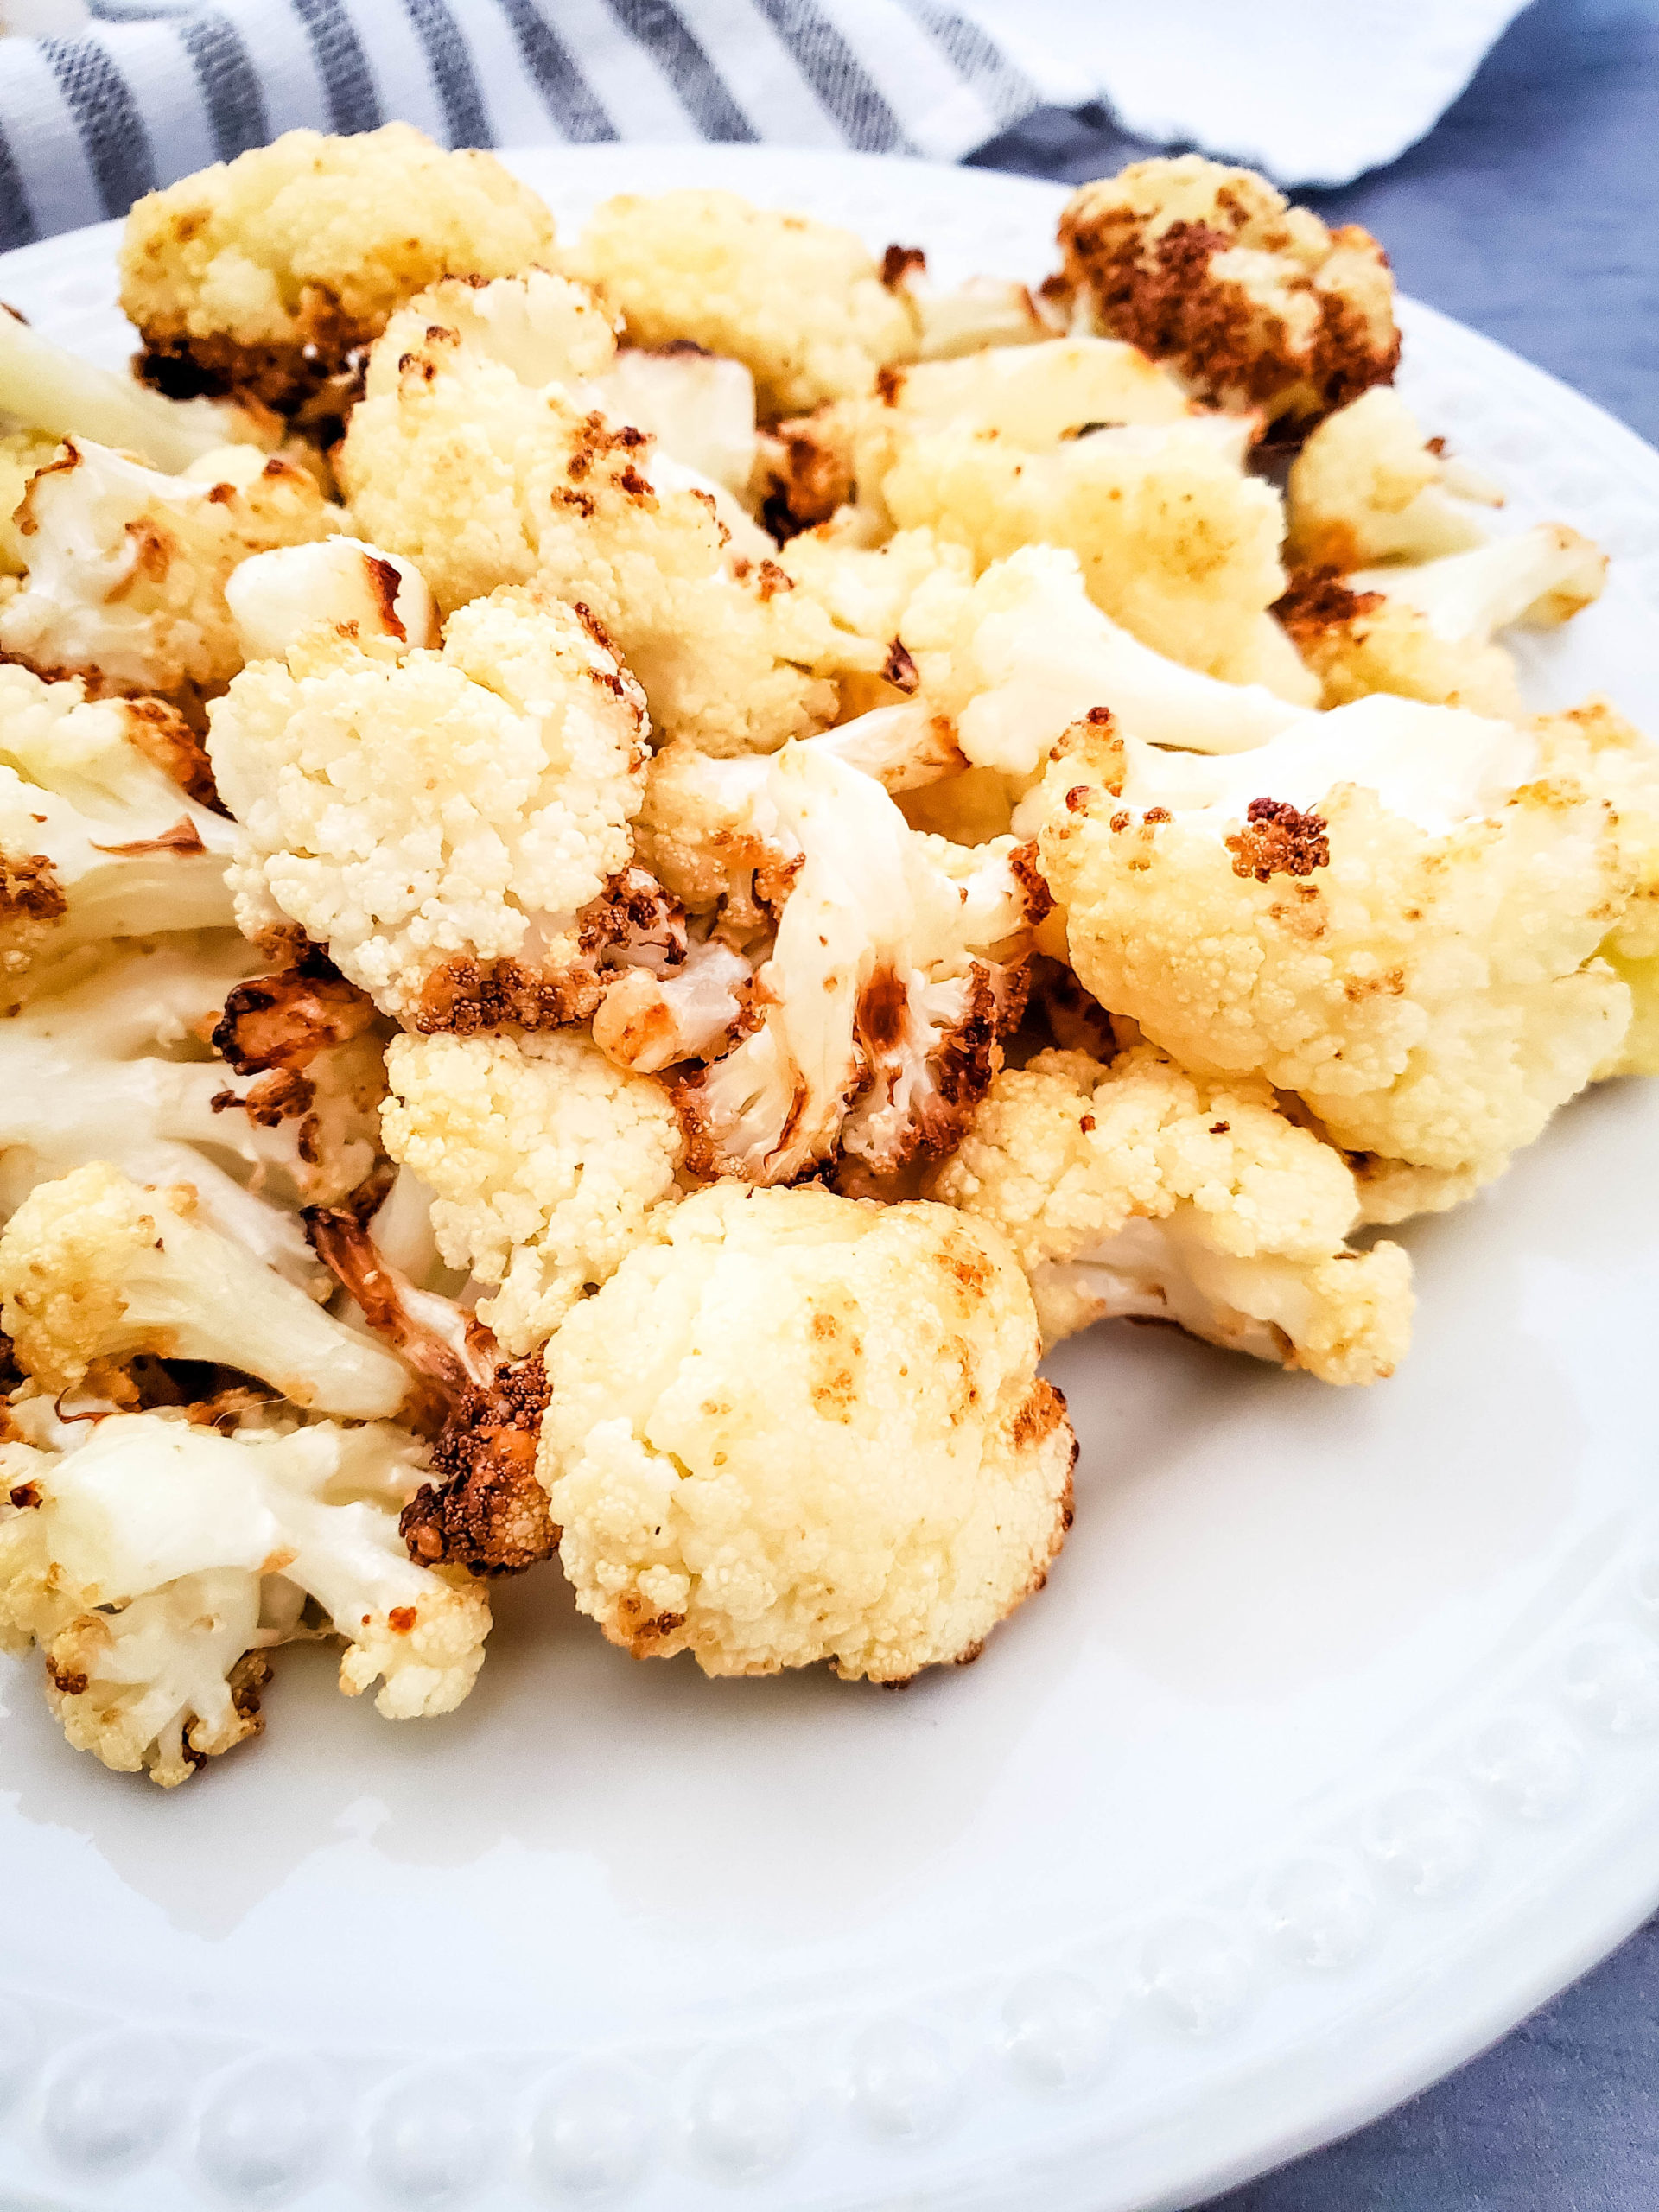 cauliflower after air frying on a white plate.